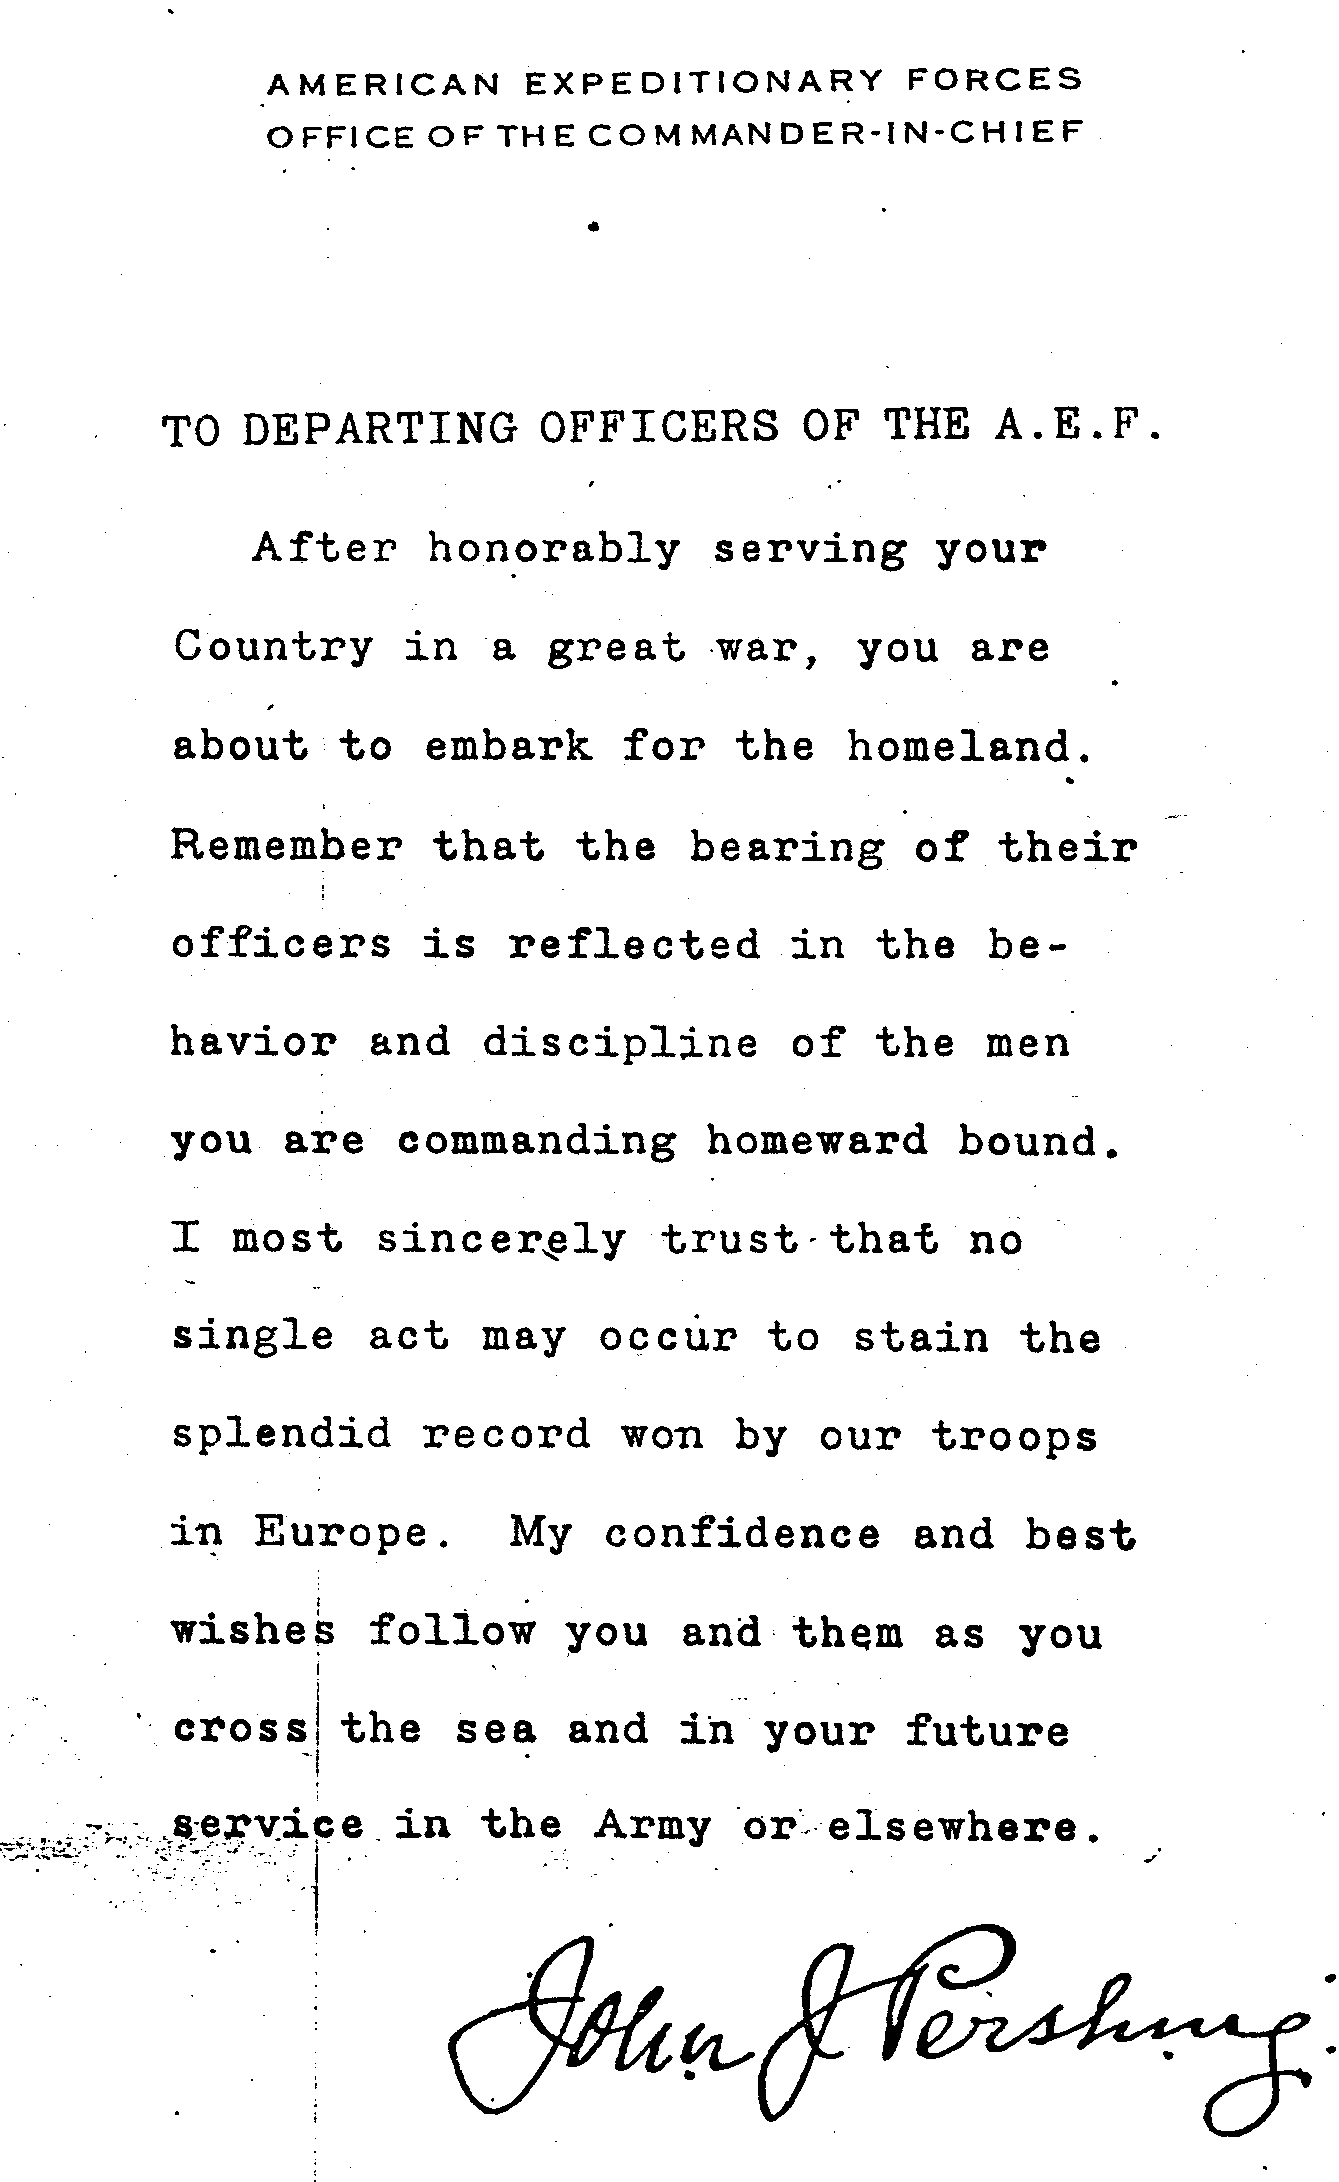 Pershing Letter